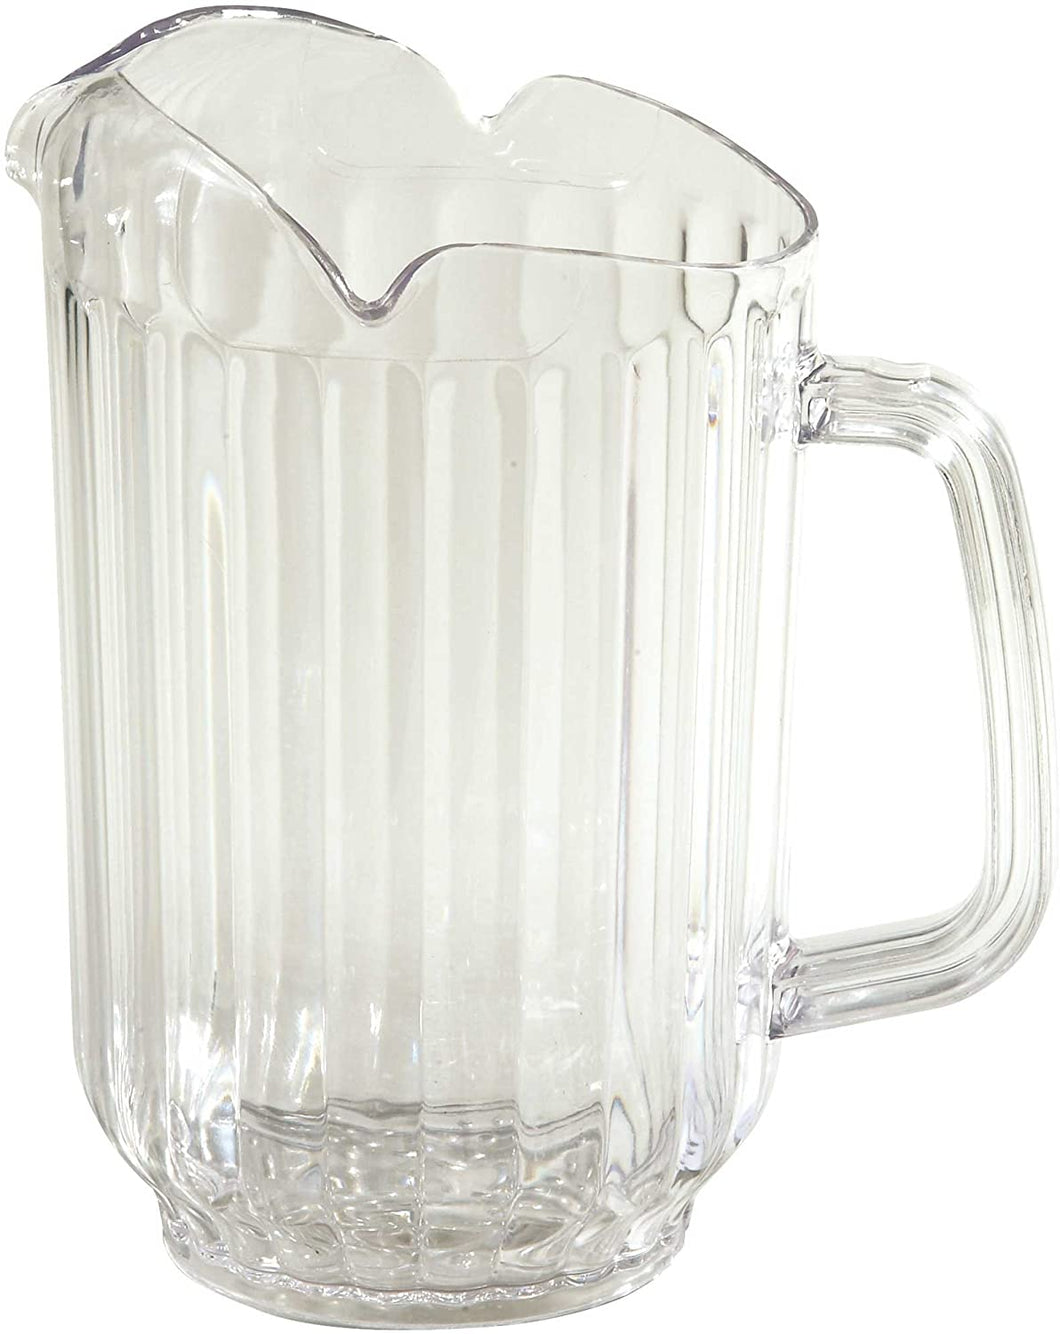 Winco Polycarbonate Water Pitcher with 3 Spouts, 60-Ounce, Clear